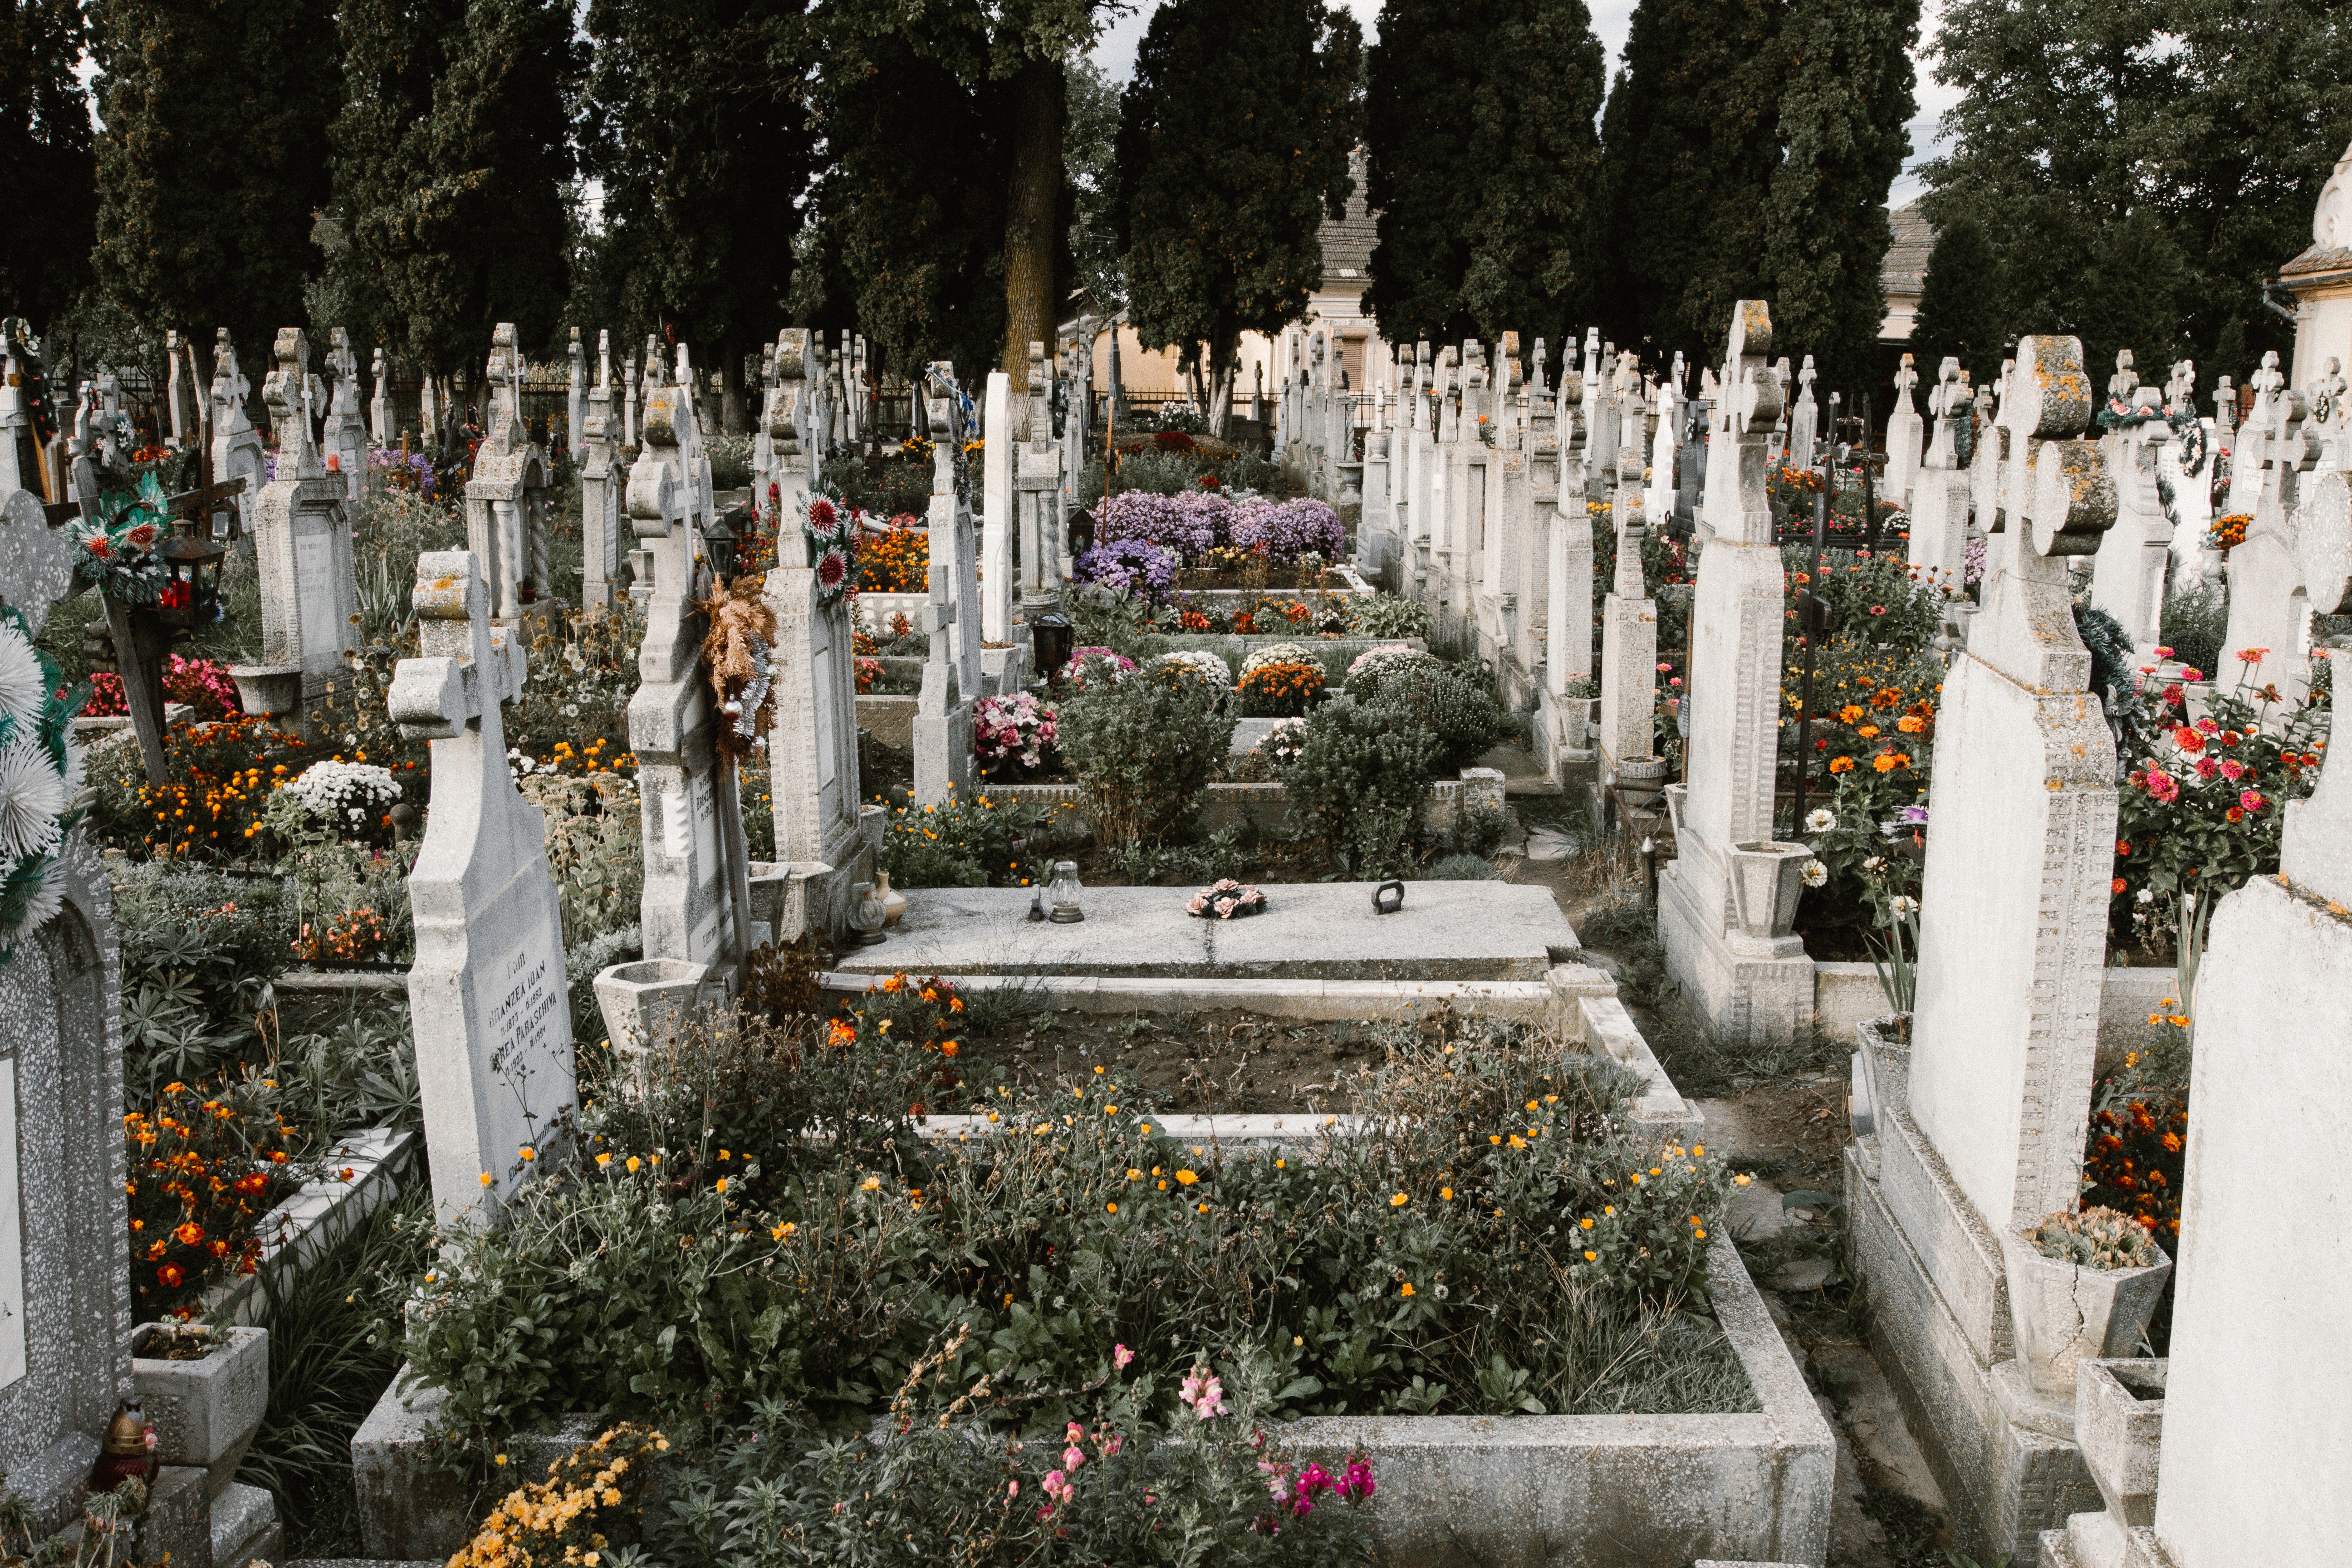 Graveyard with grey tombstones and colourful flowers.